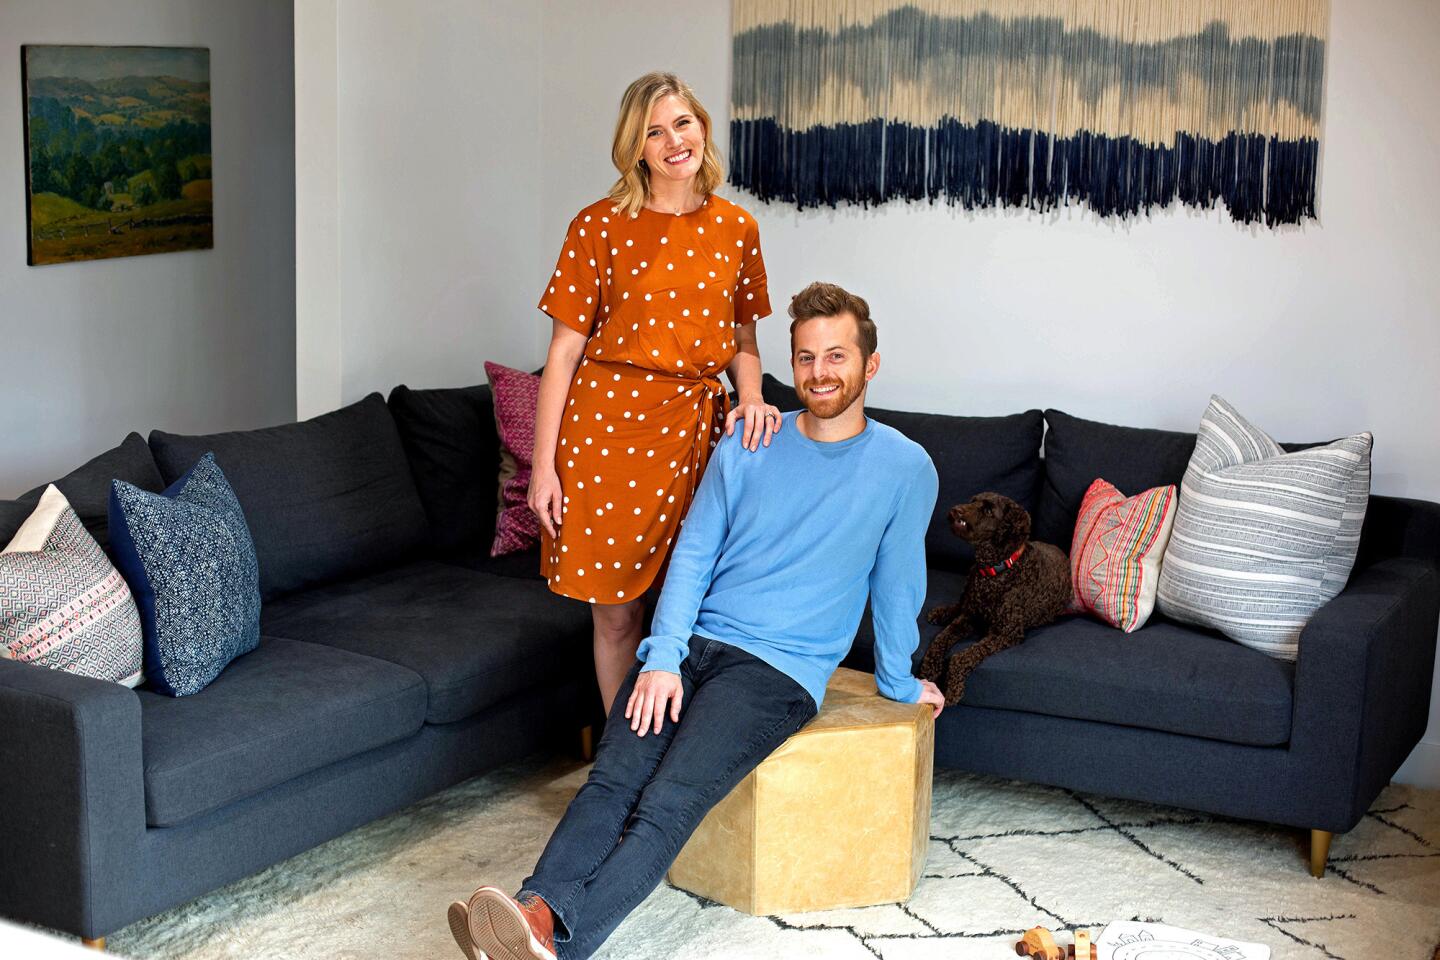 Try Guys comic Ned Fulmer and his wife, Ariel, in the living space of their newly designed and remodeled 1,300-square-foot Elysian Valley home.